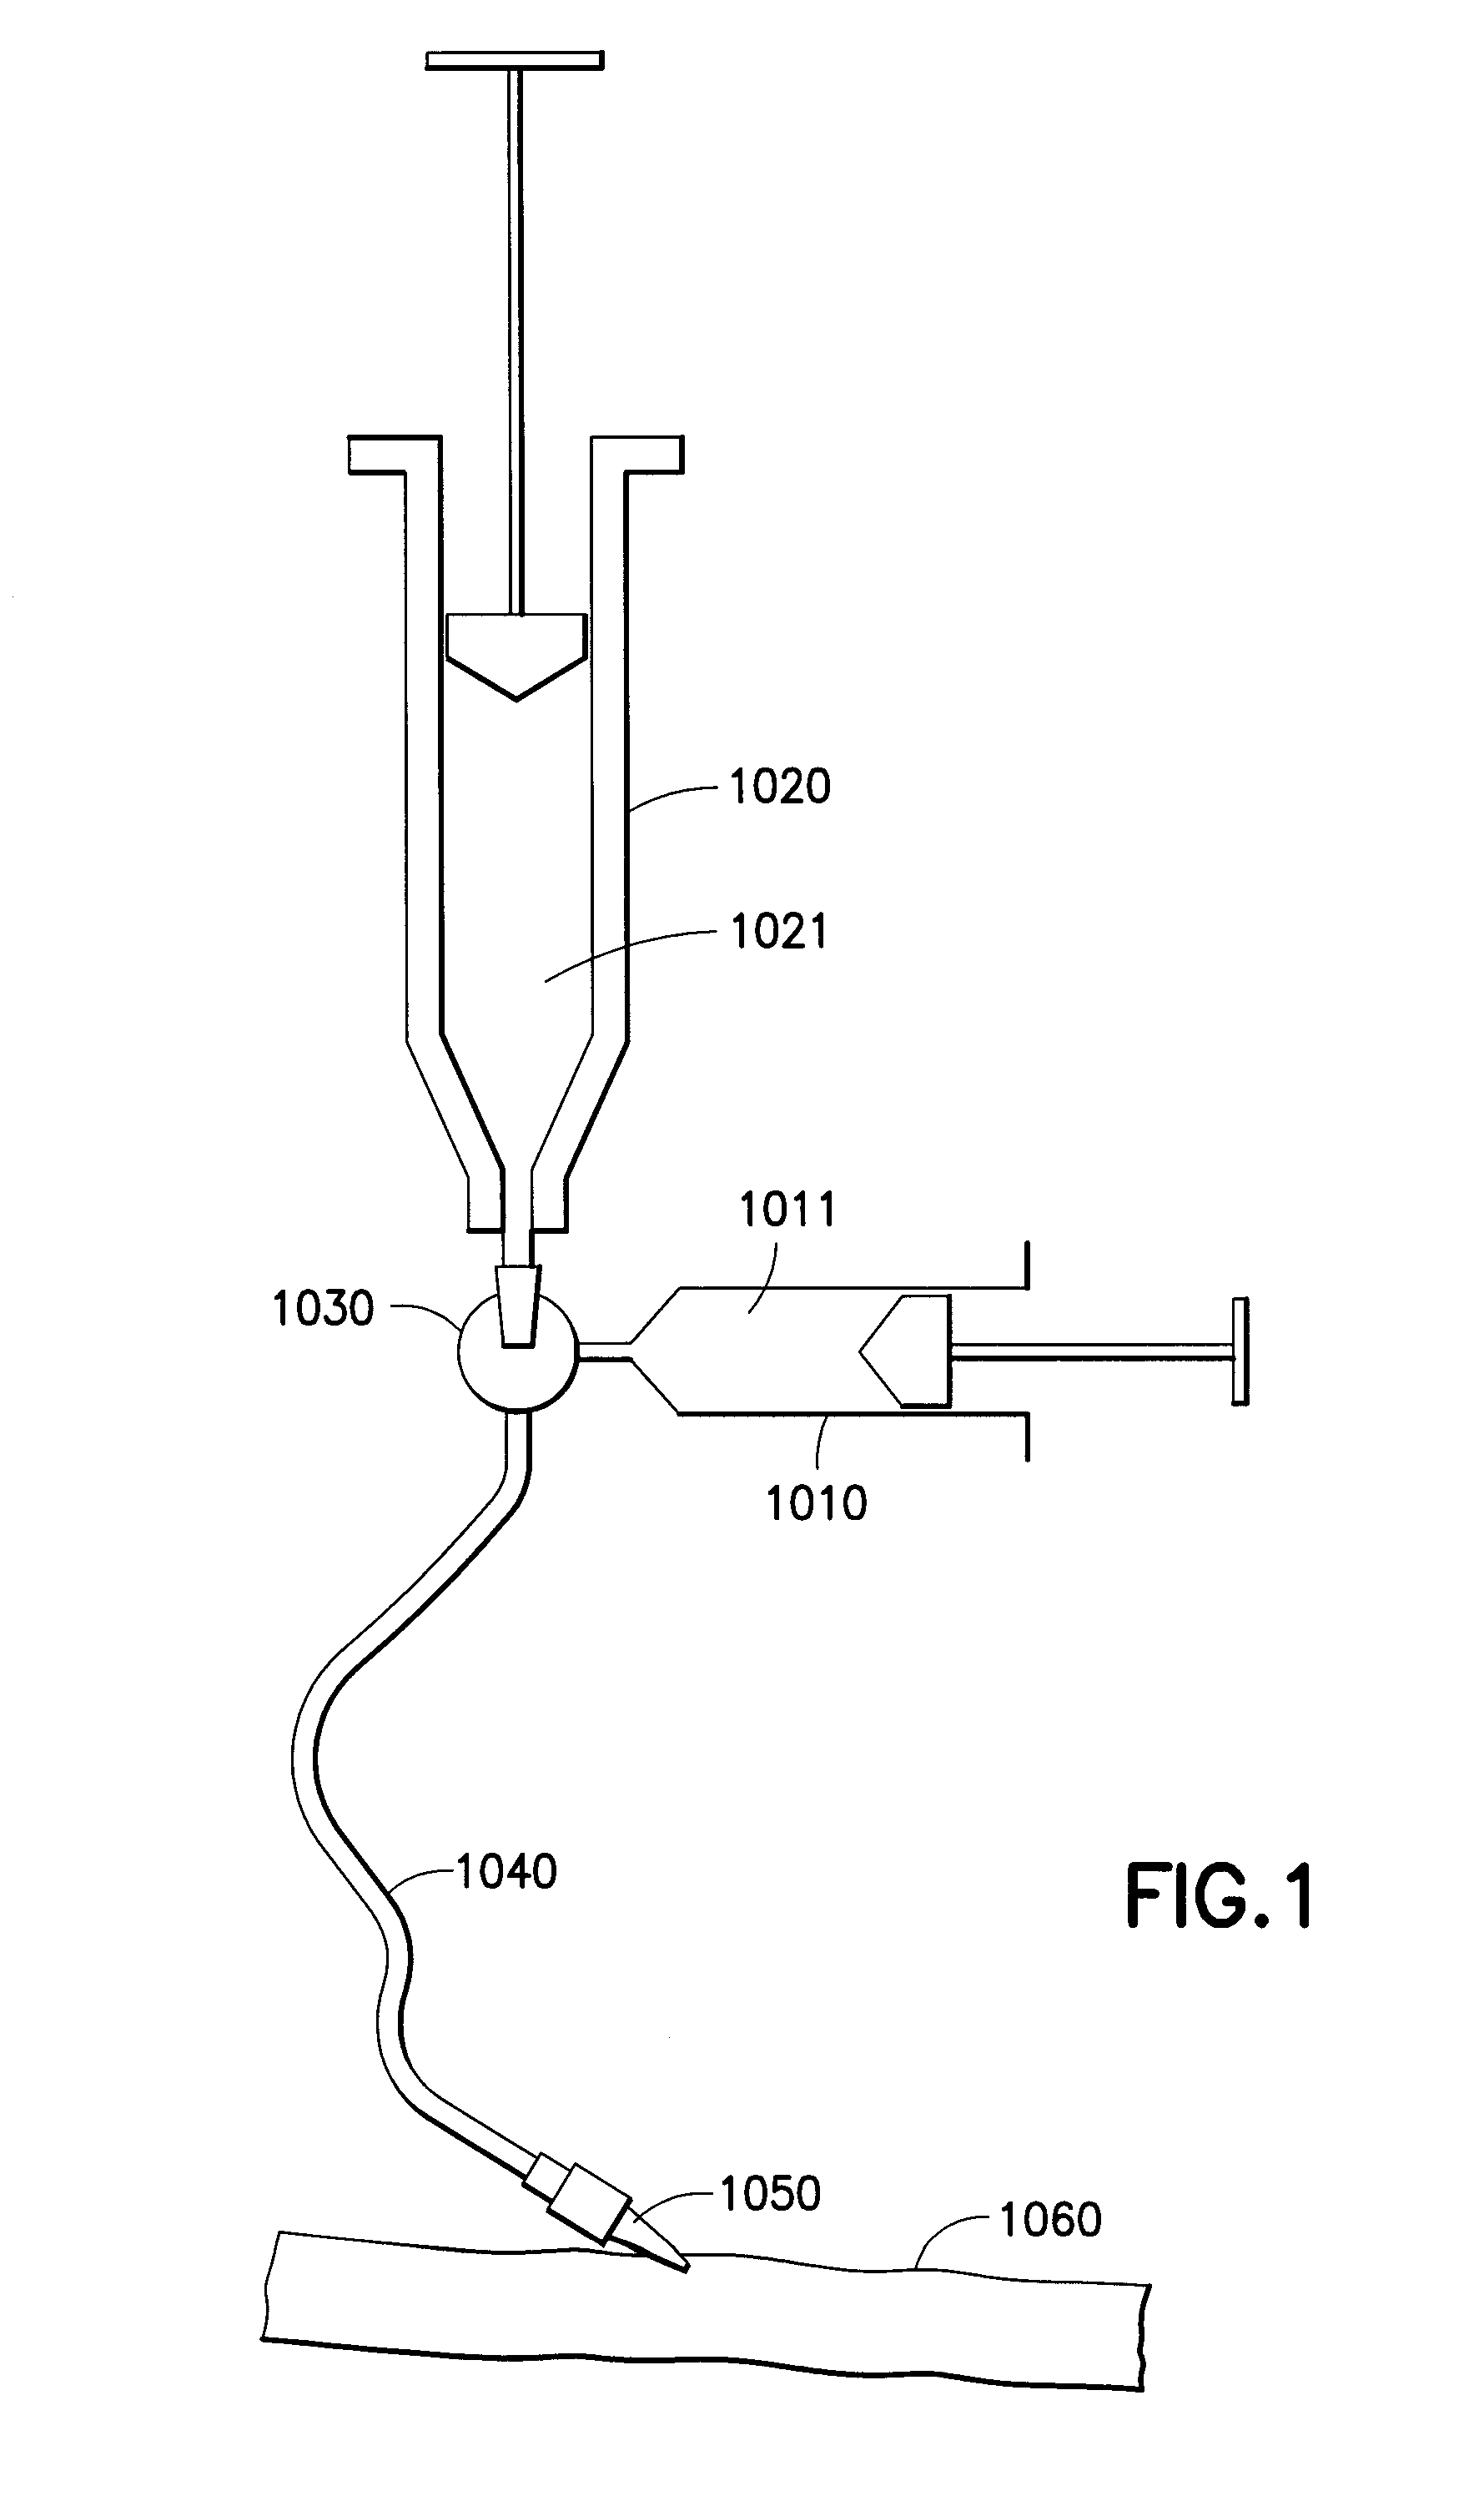 Apparatus and Methods for Delivery of Fluid Injection Boluses to Patients and Handling Harmful Fluids